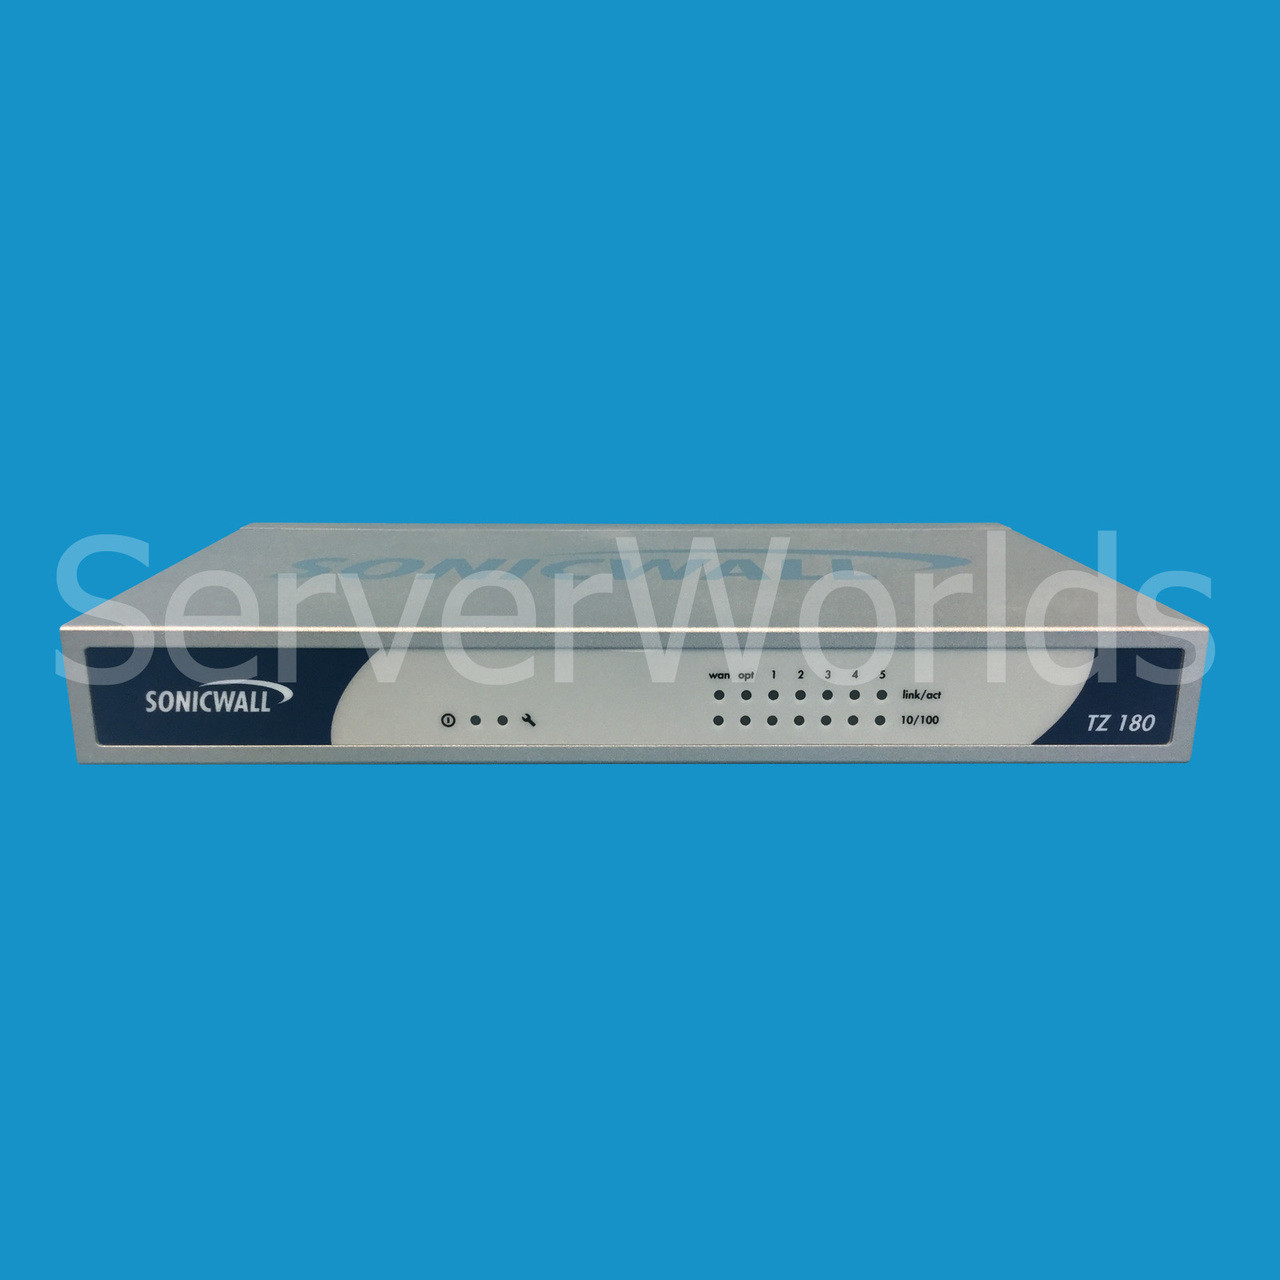 SonicWall TZ180 Wireless VPN Fireall Security Router